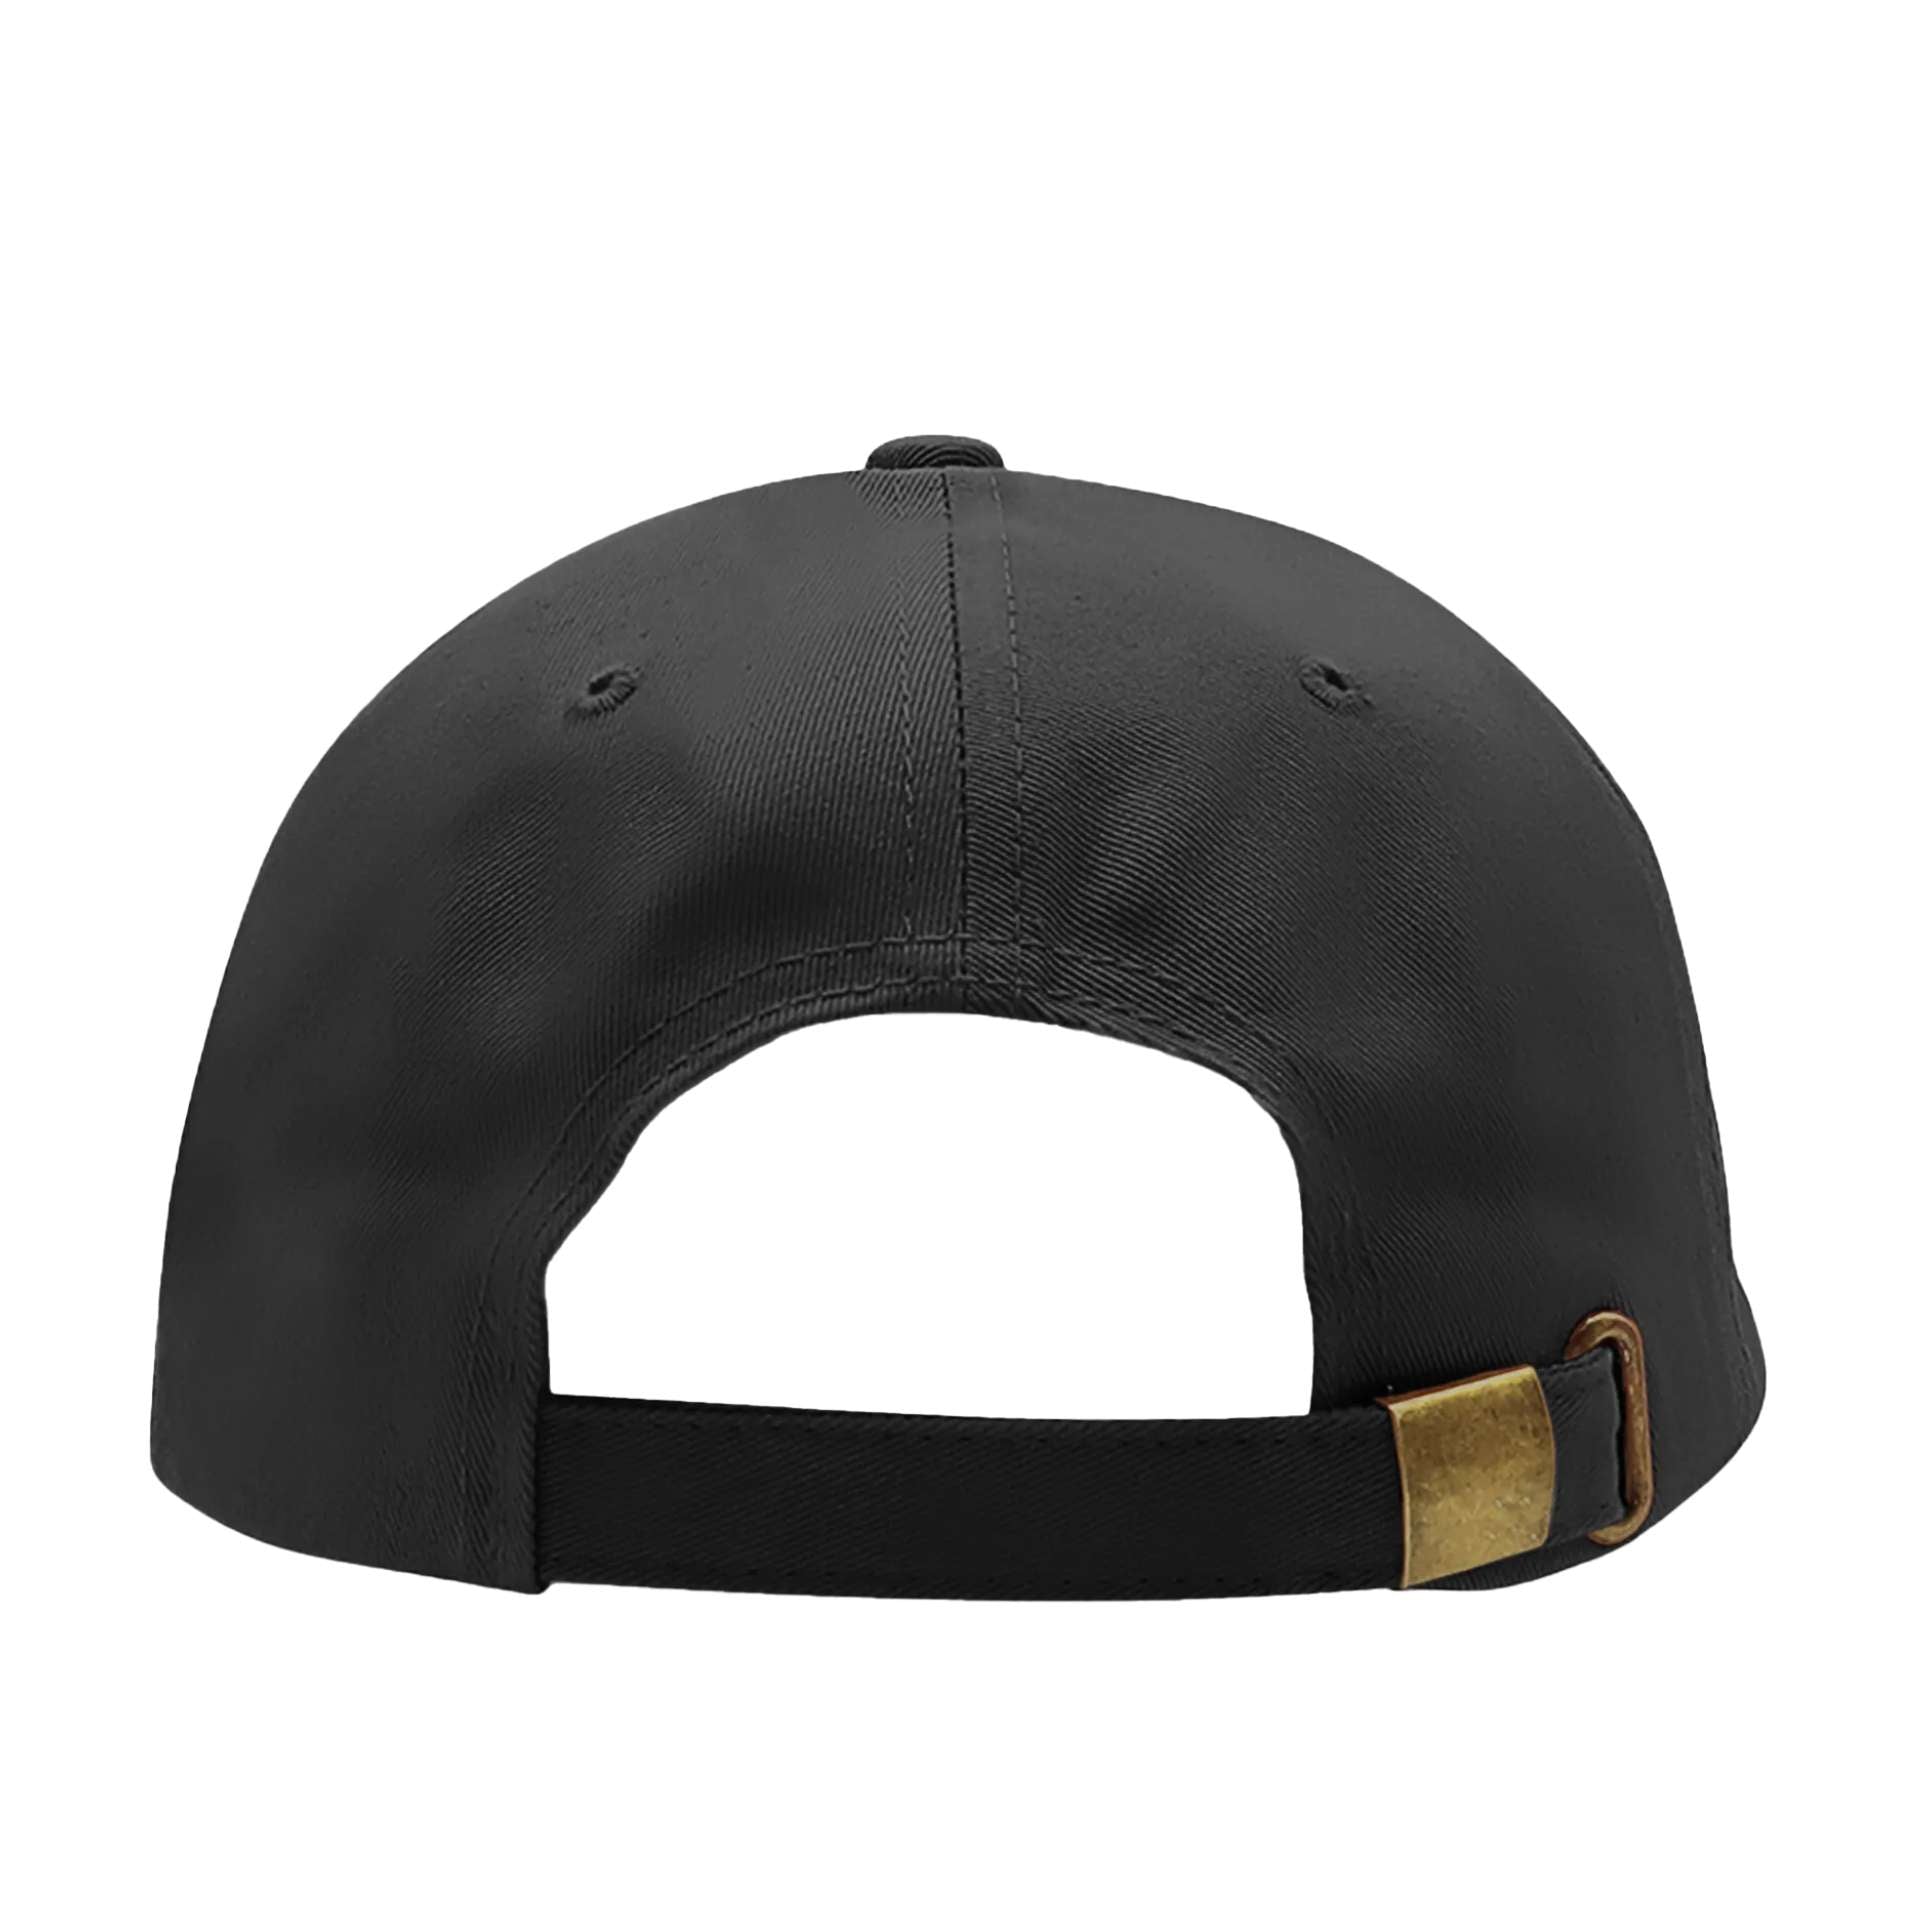 Back of Baseball Cap showing Brass buckle - DSY Lifestyle